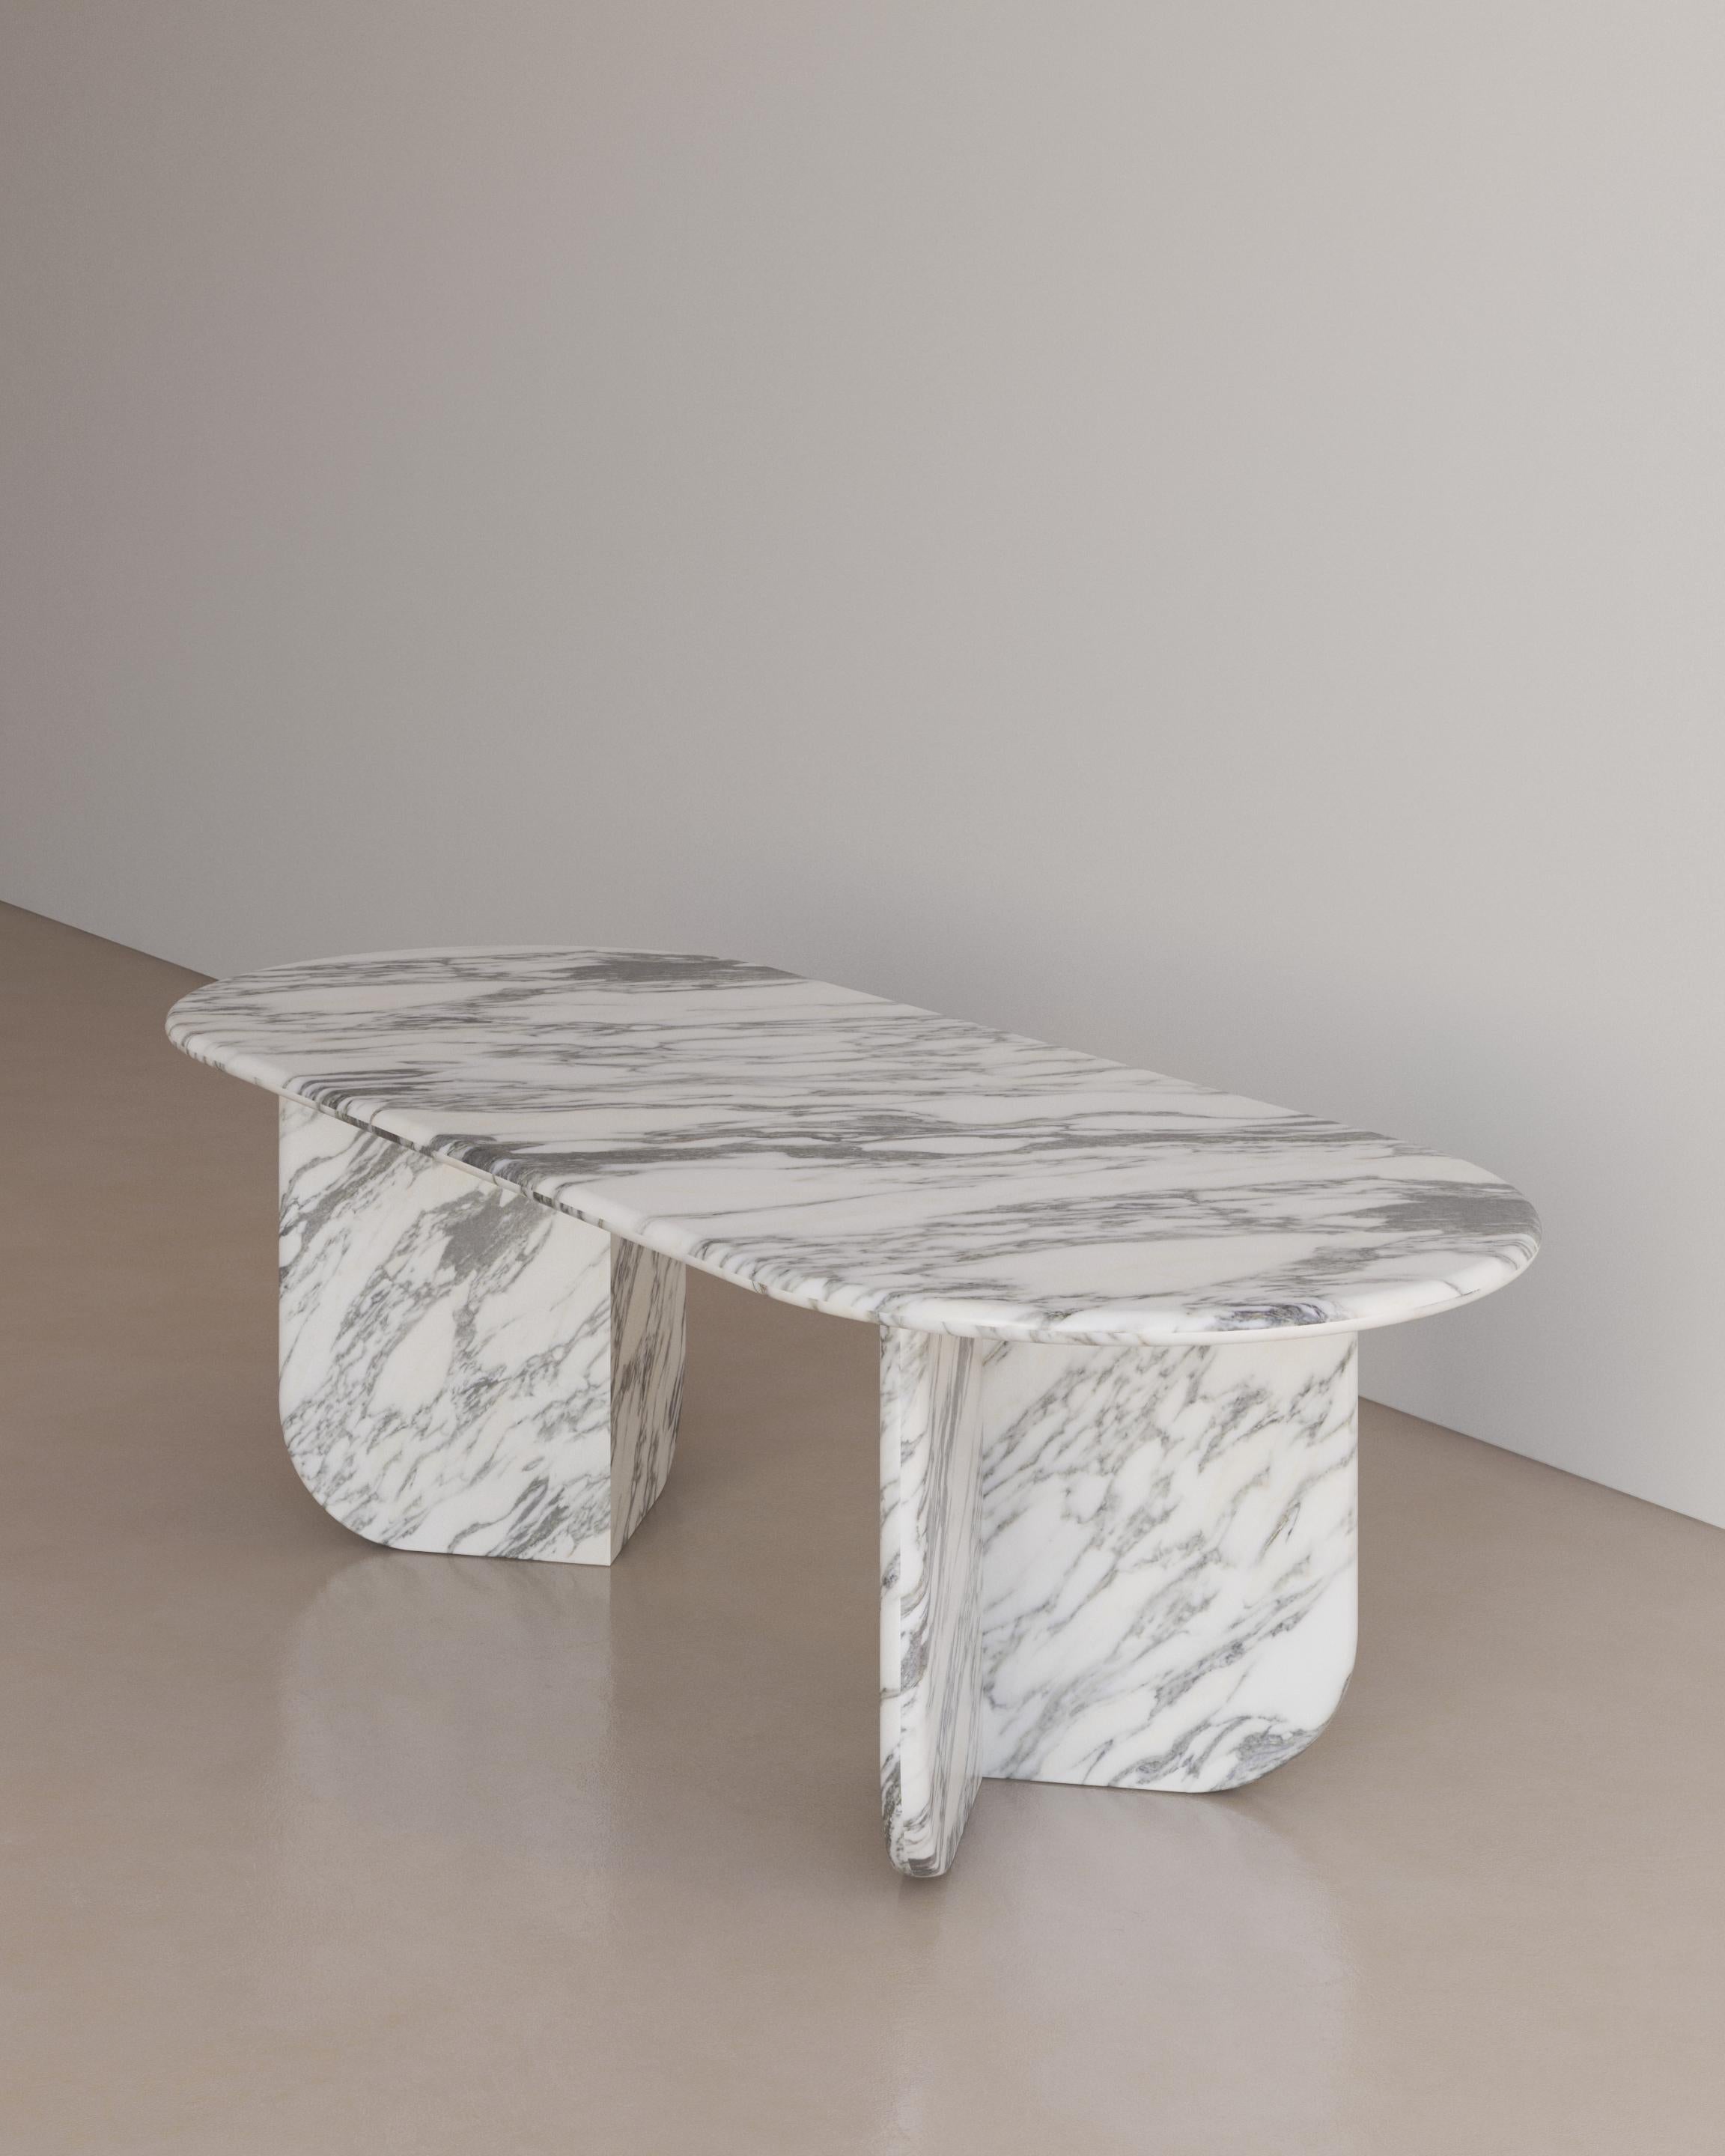 The Essentialist presents the Ètoile Dining Table I in Bianco Arabescato Marble. A bold rounded circle effortlessly stacks upon a four point star. Smooth planes exonerate beautiful natural patterning, forging a statement of minimalism that embodies